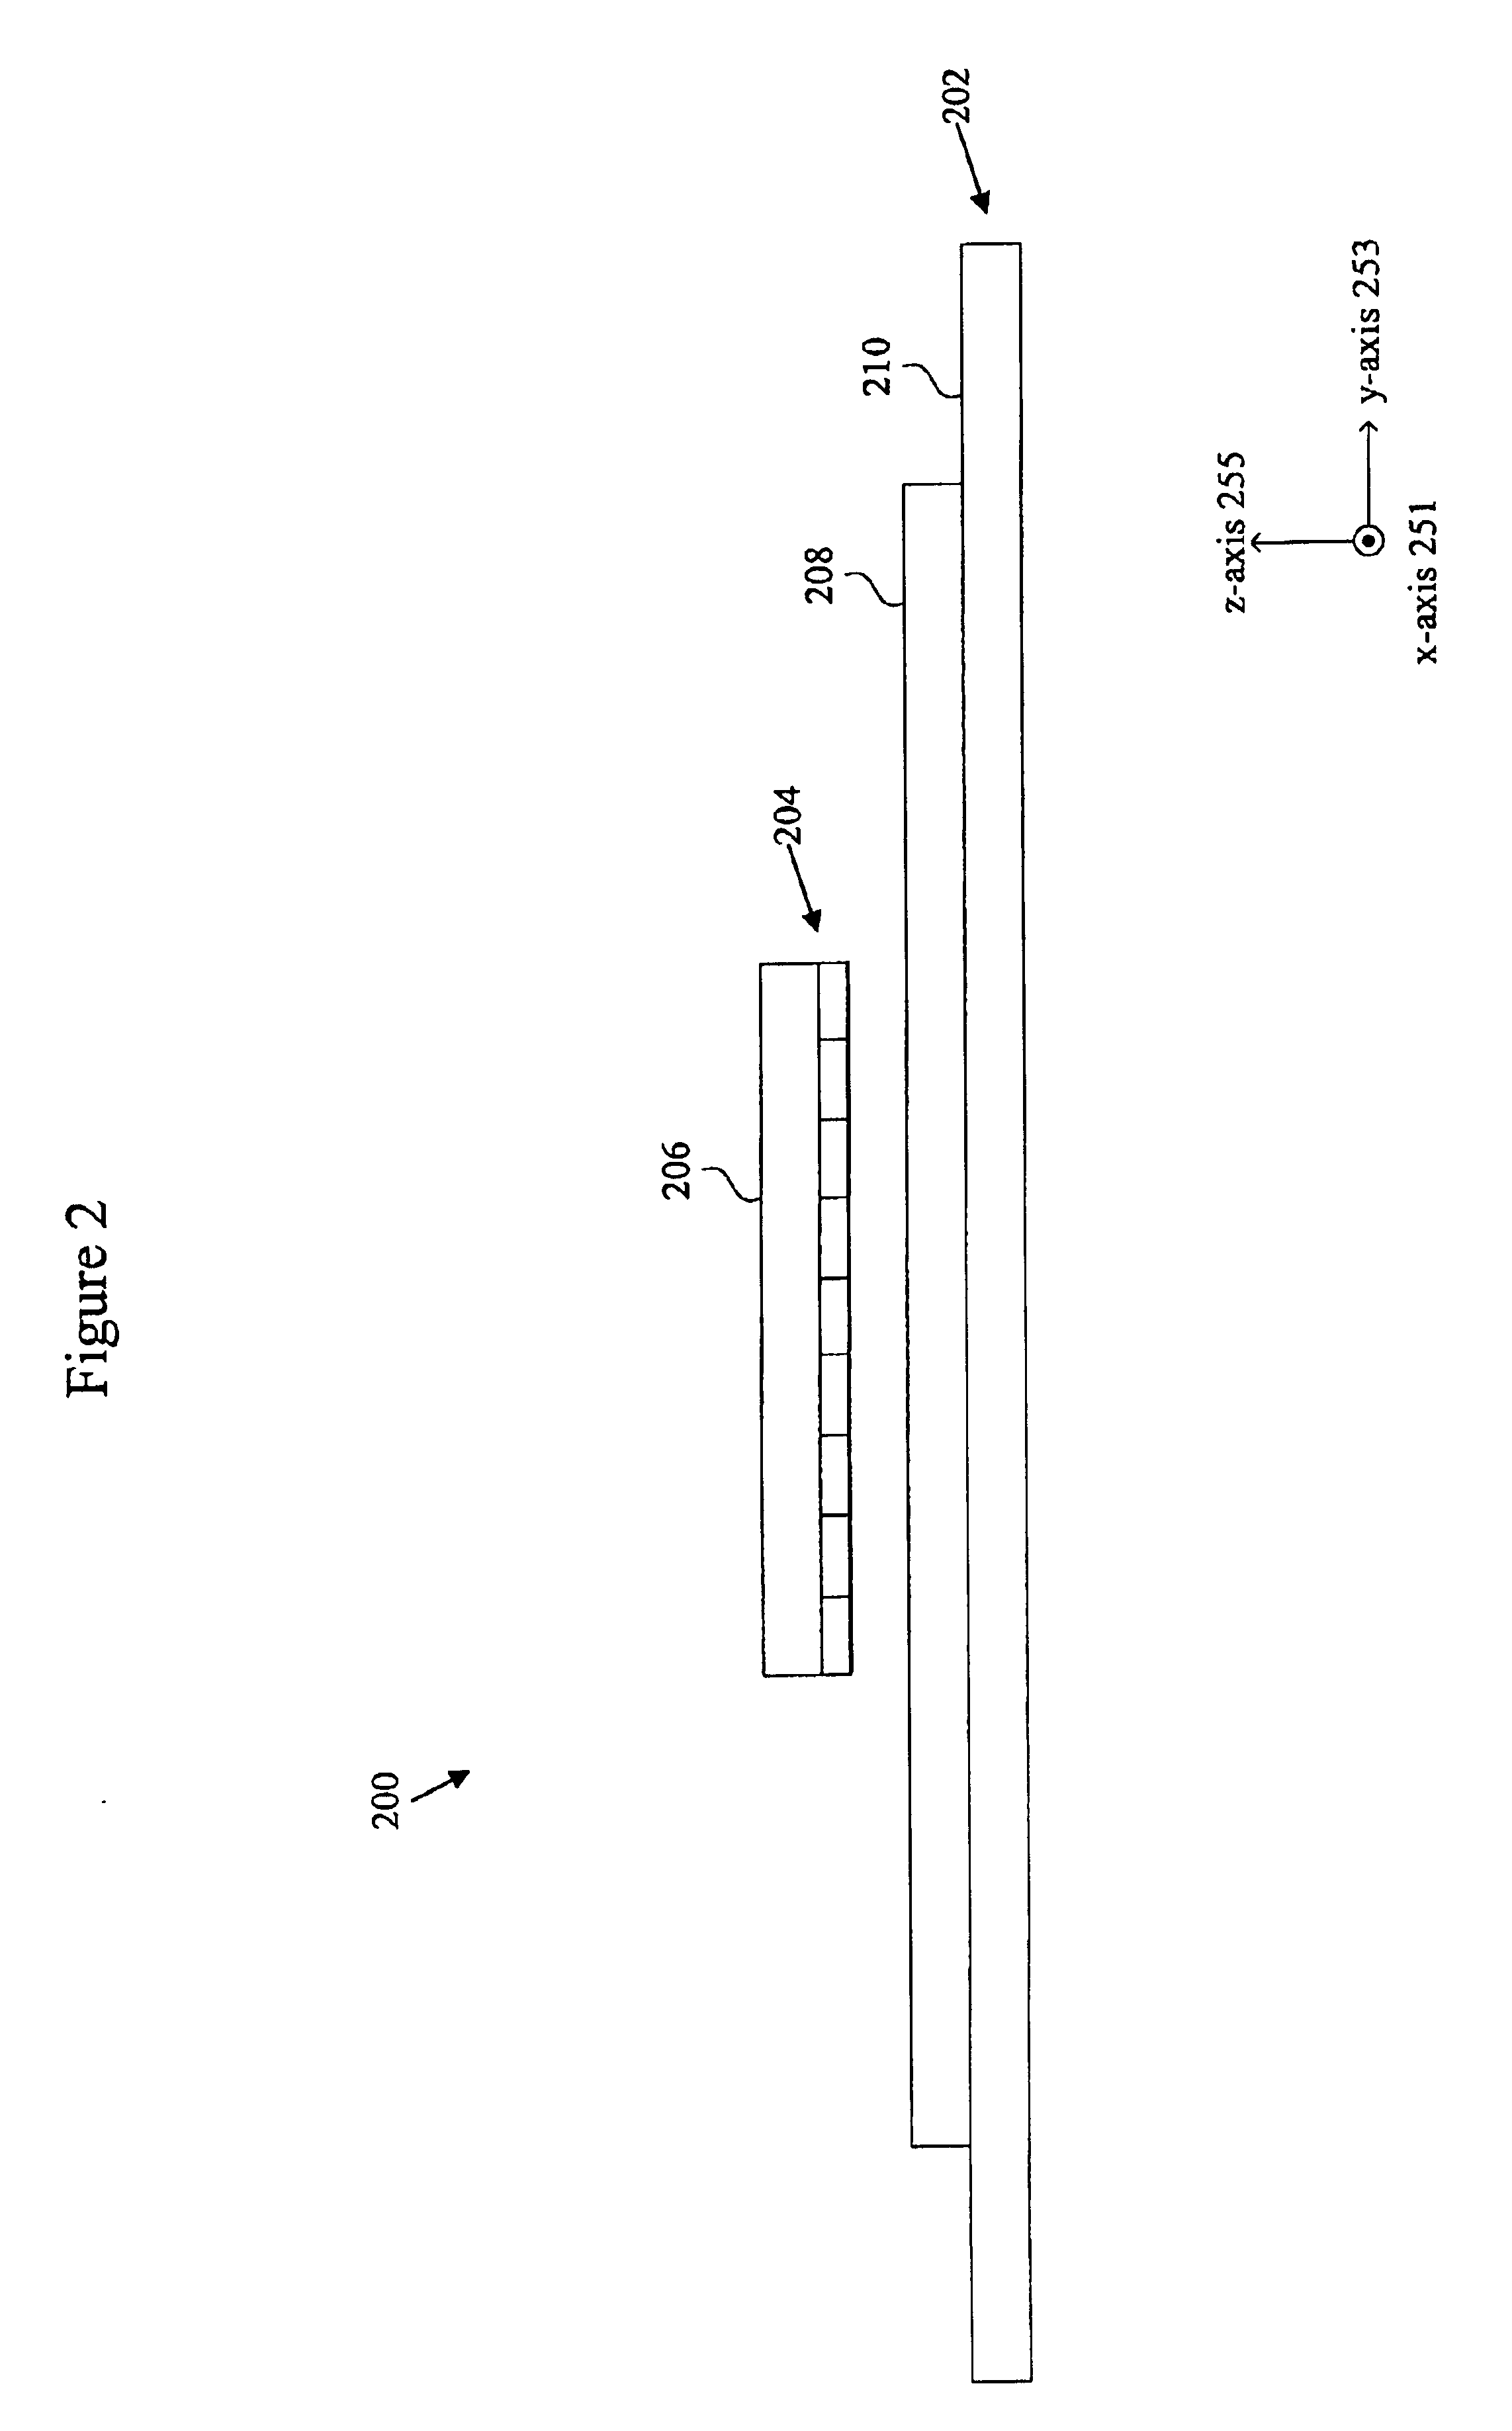 Methods and apparatus for initializing a planar motor